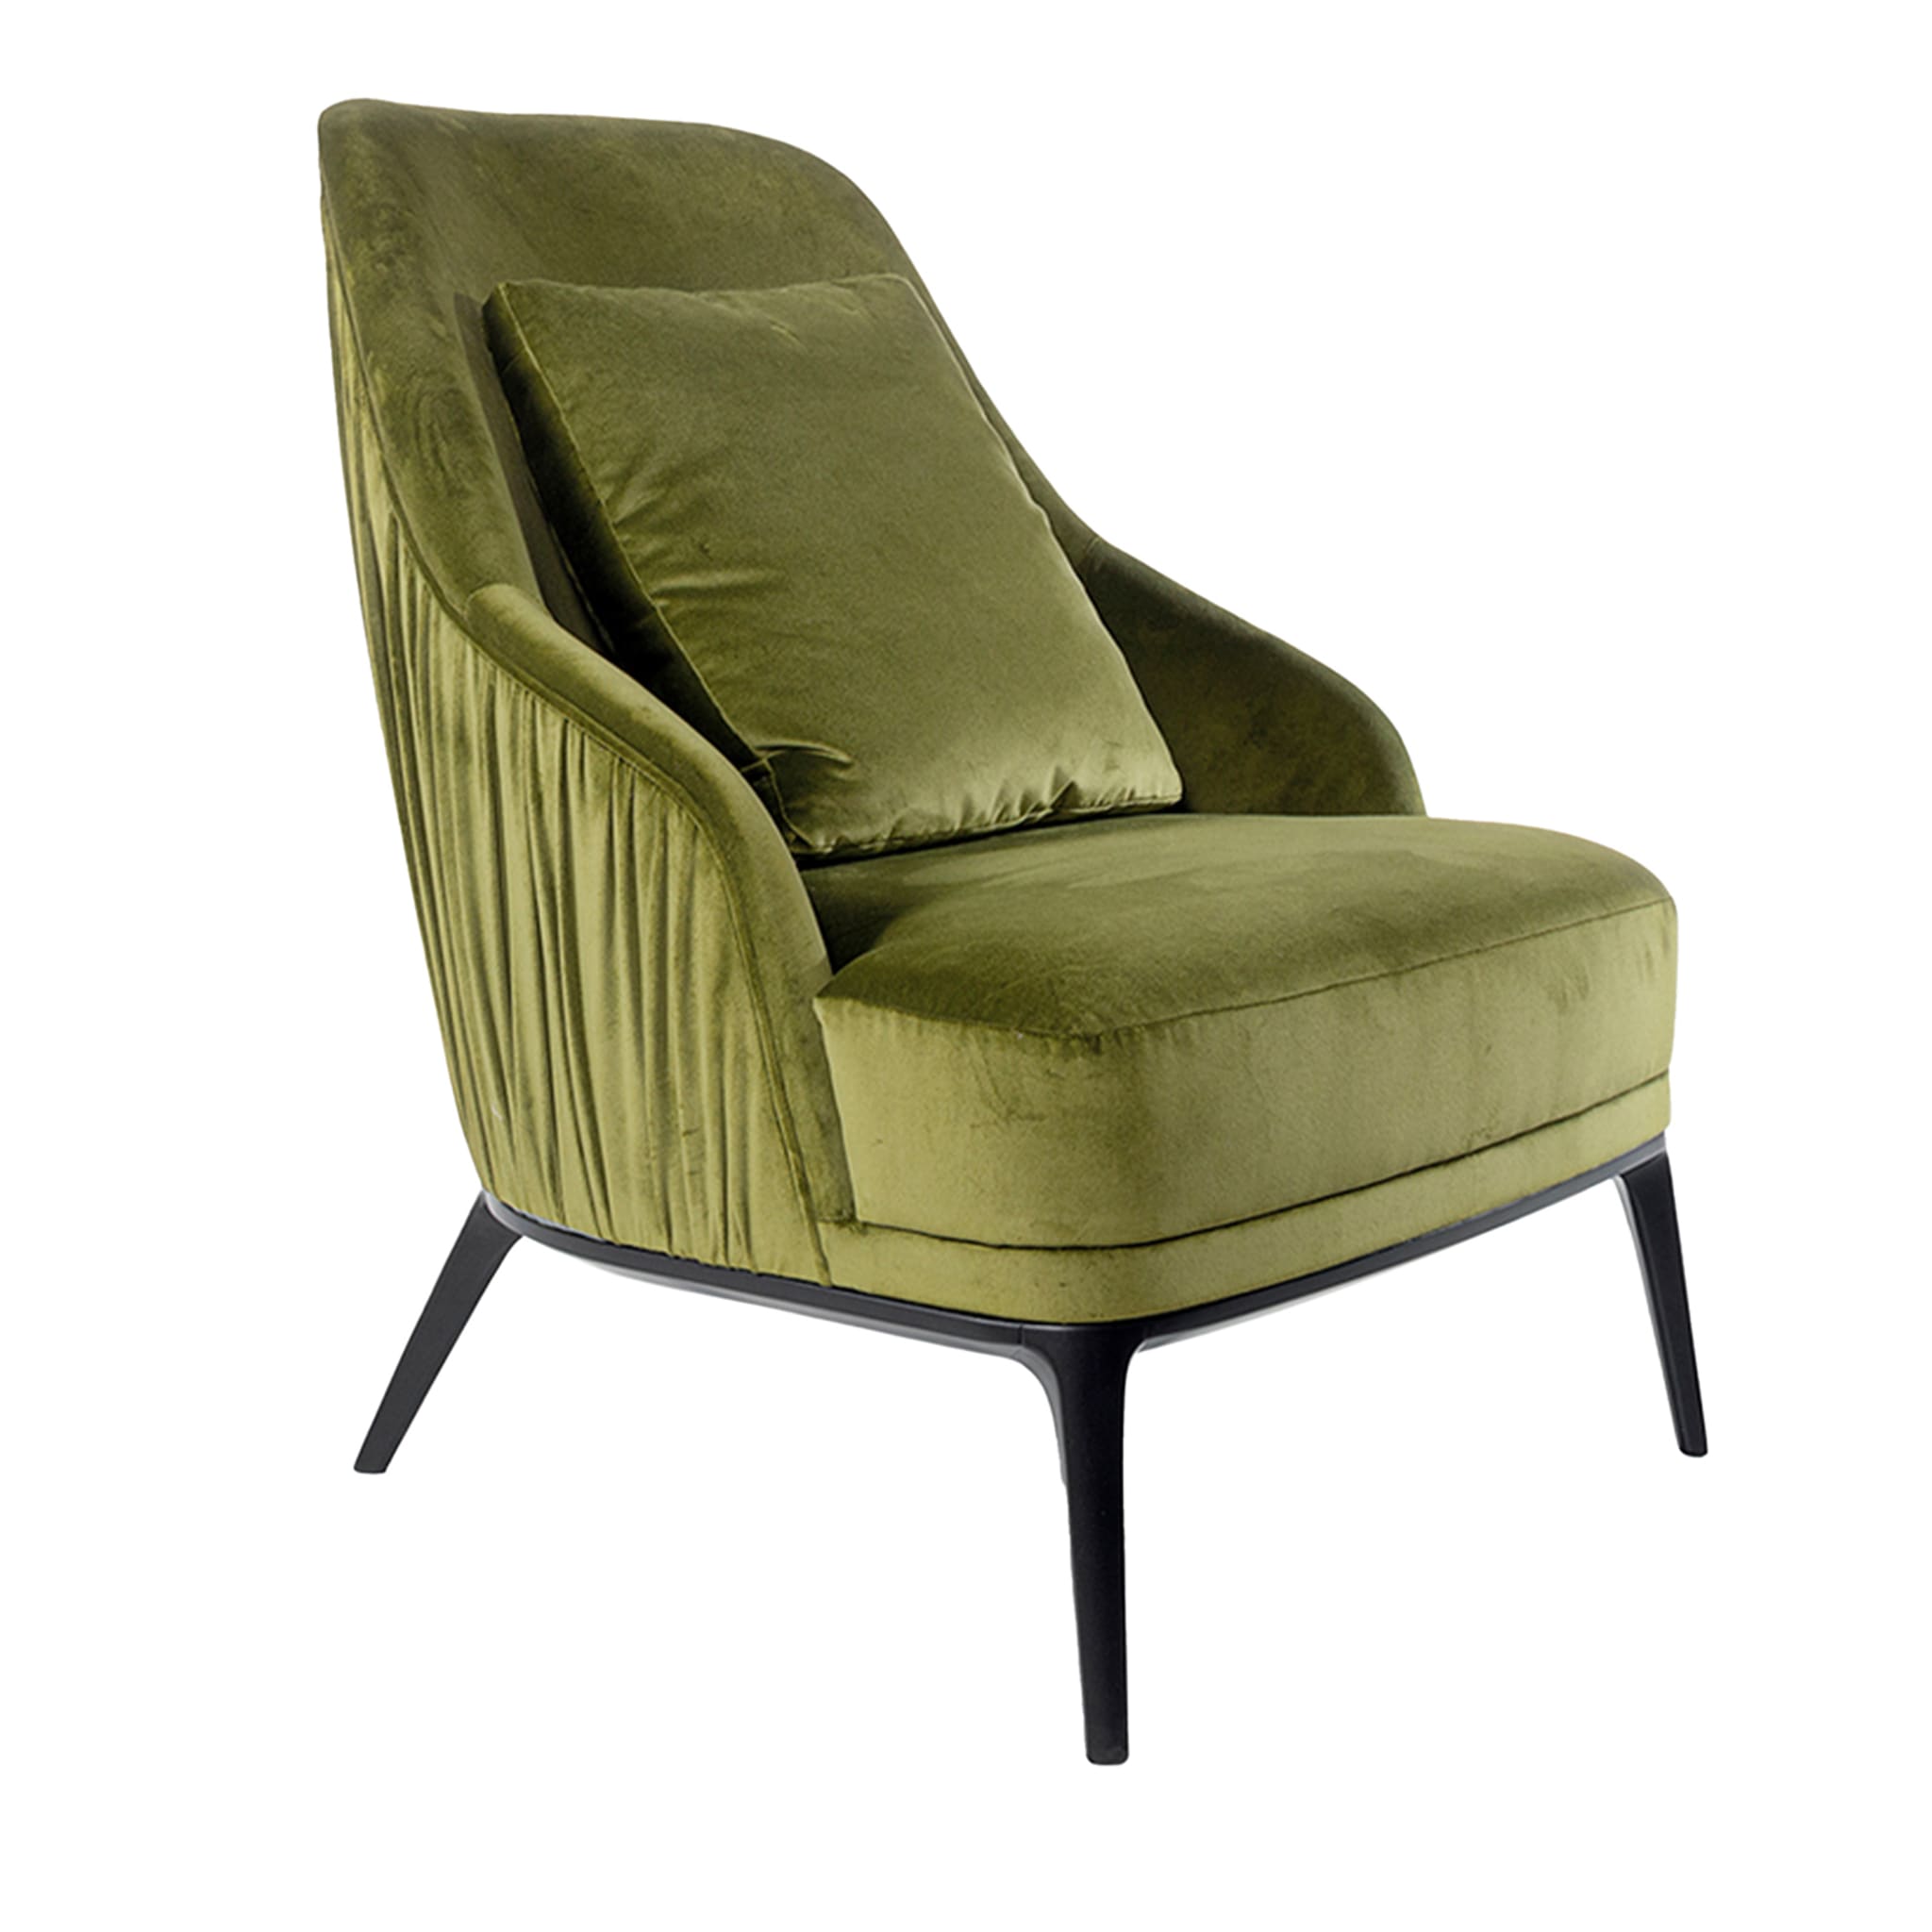 Lily armchair  - Main view